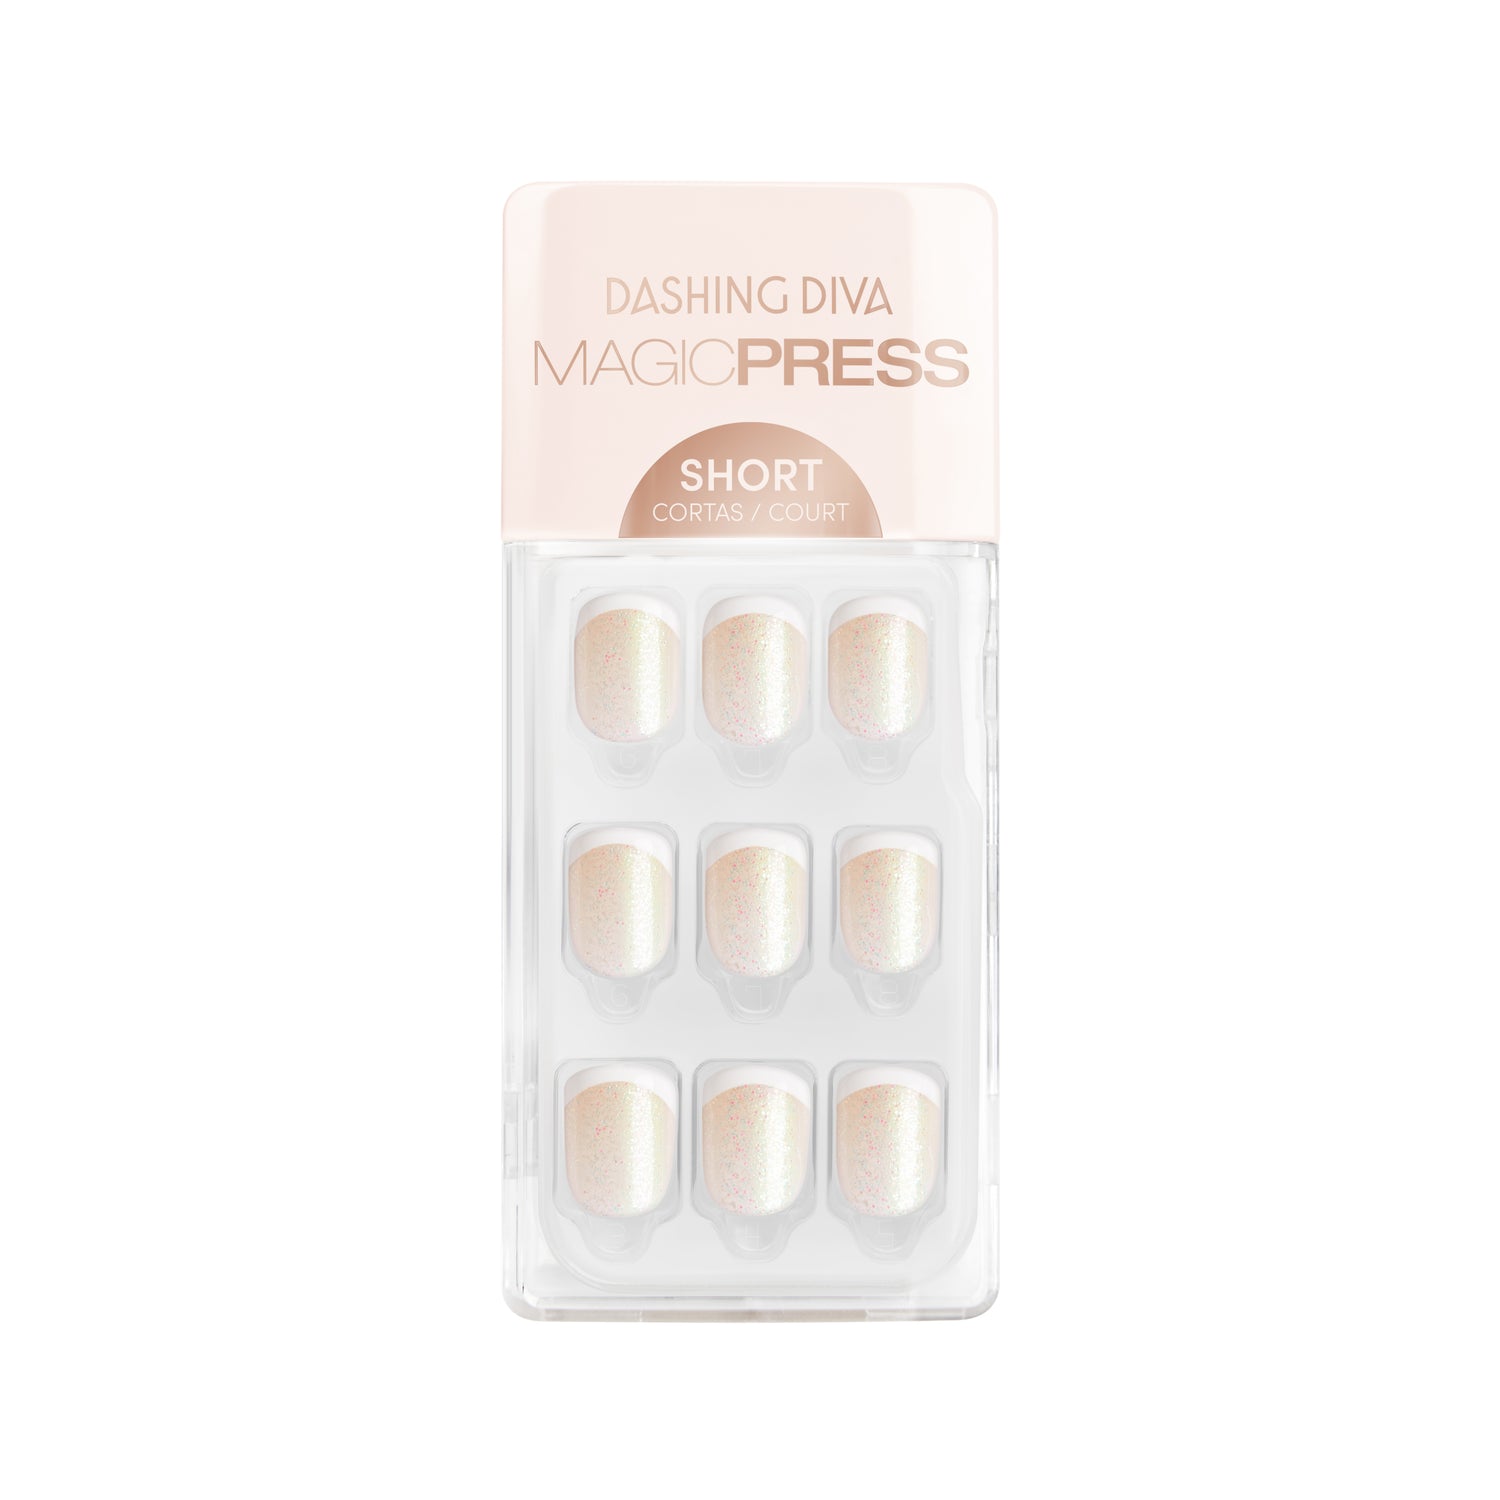 Short length, square shape, glossy finish. Light nude press-on gel nails featuring white french tips and iridescent glitter.